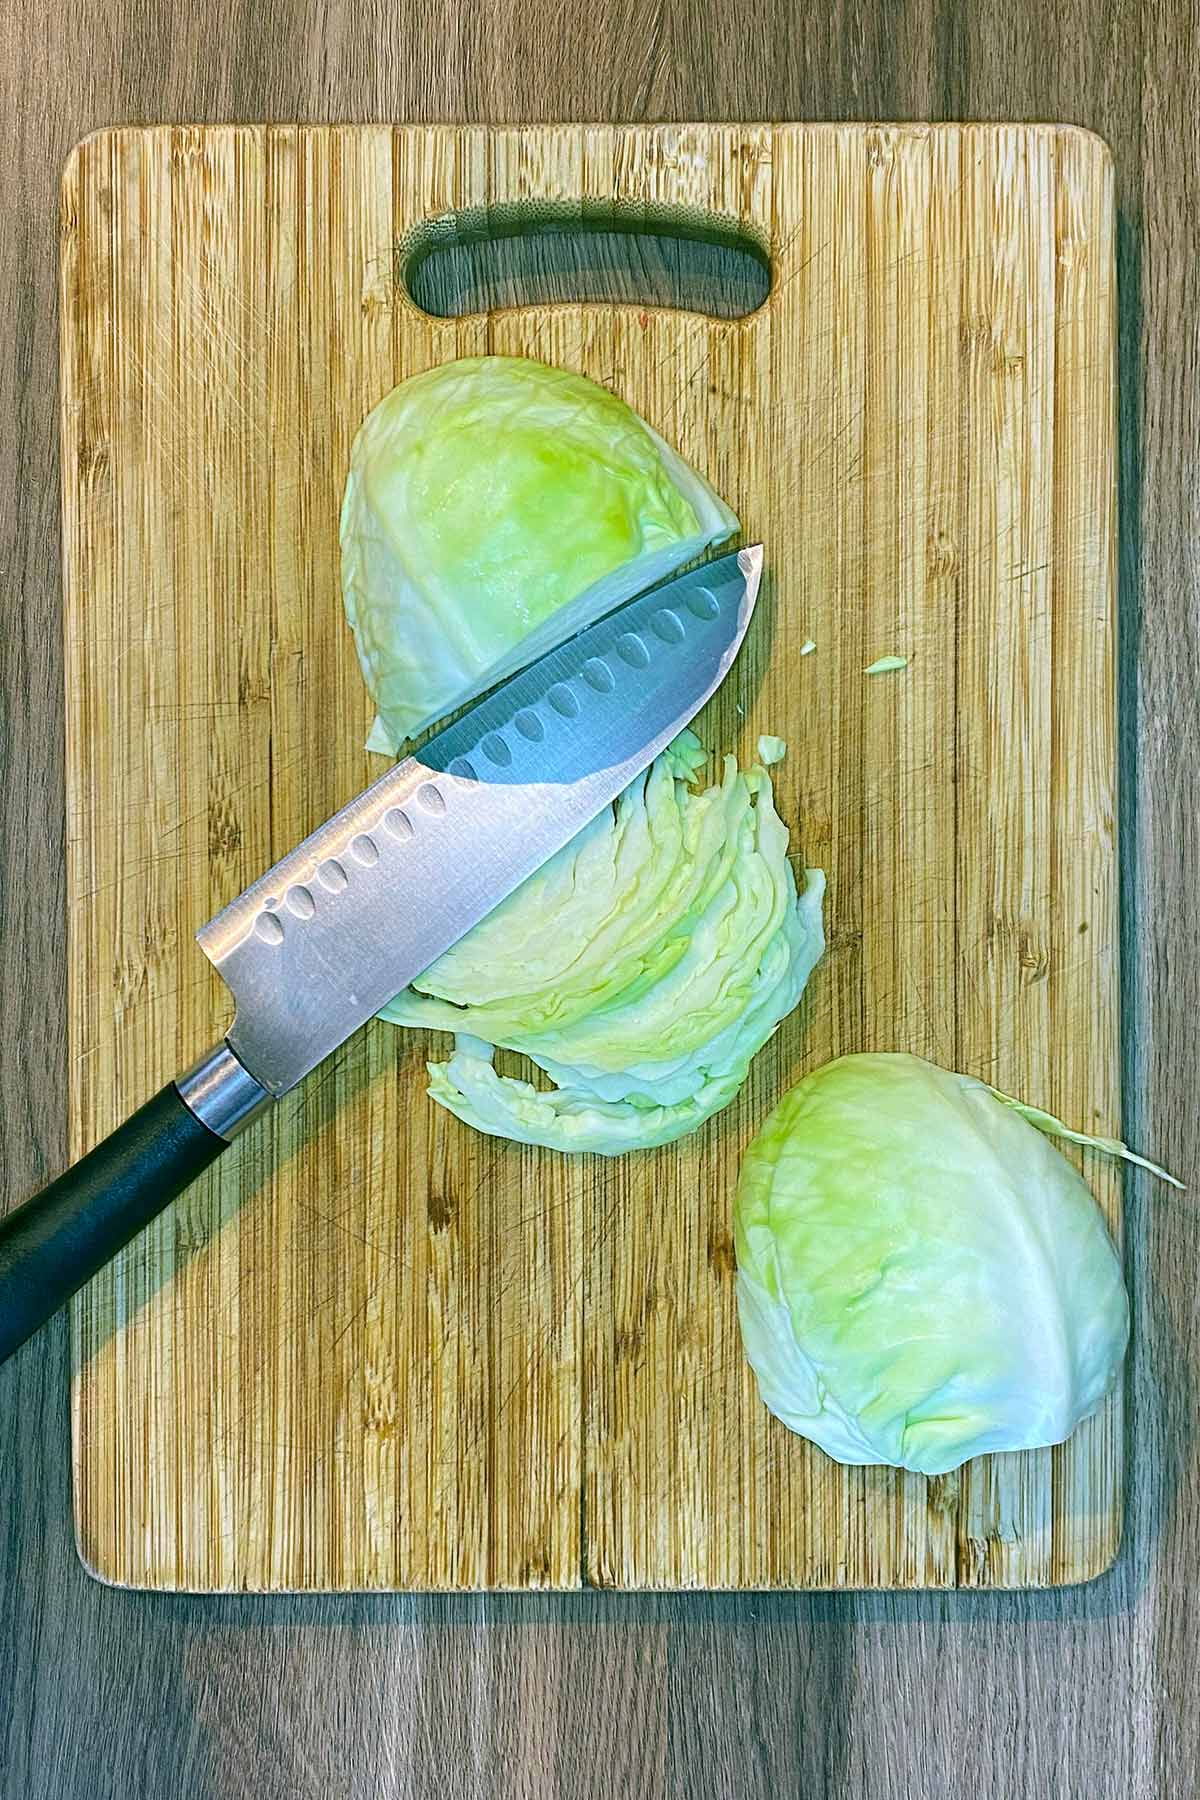 A chopping board with a chopped cabbage on it.